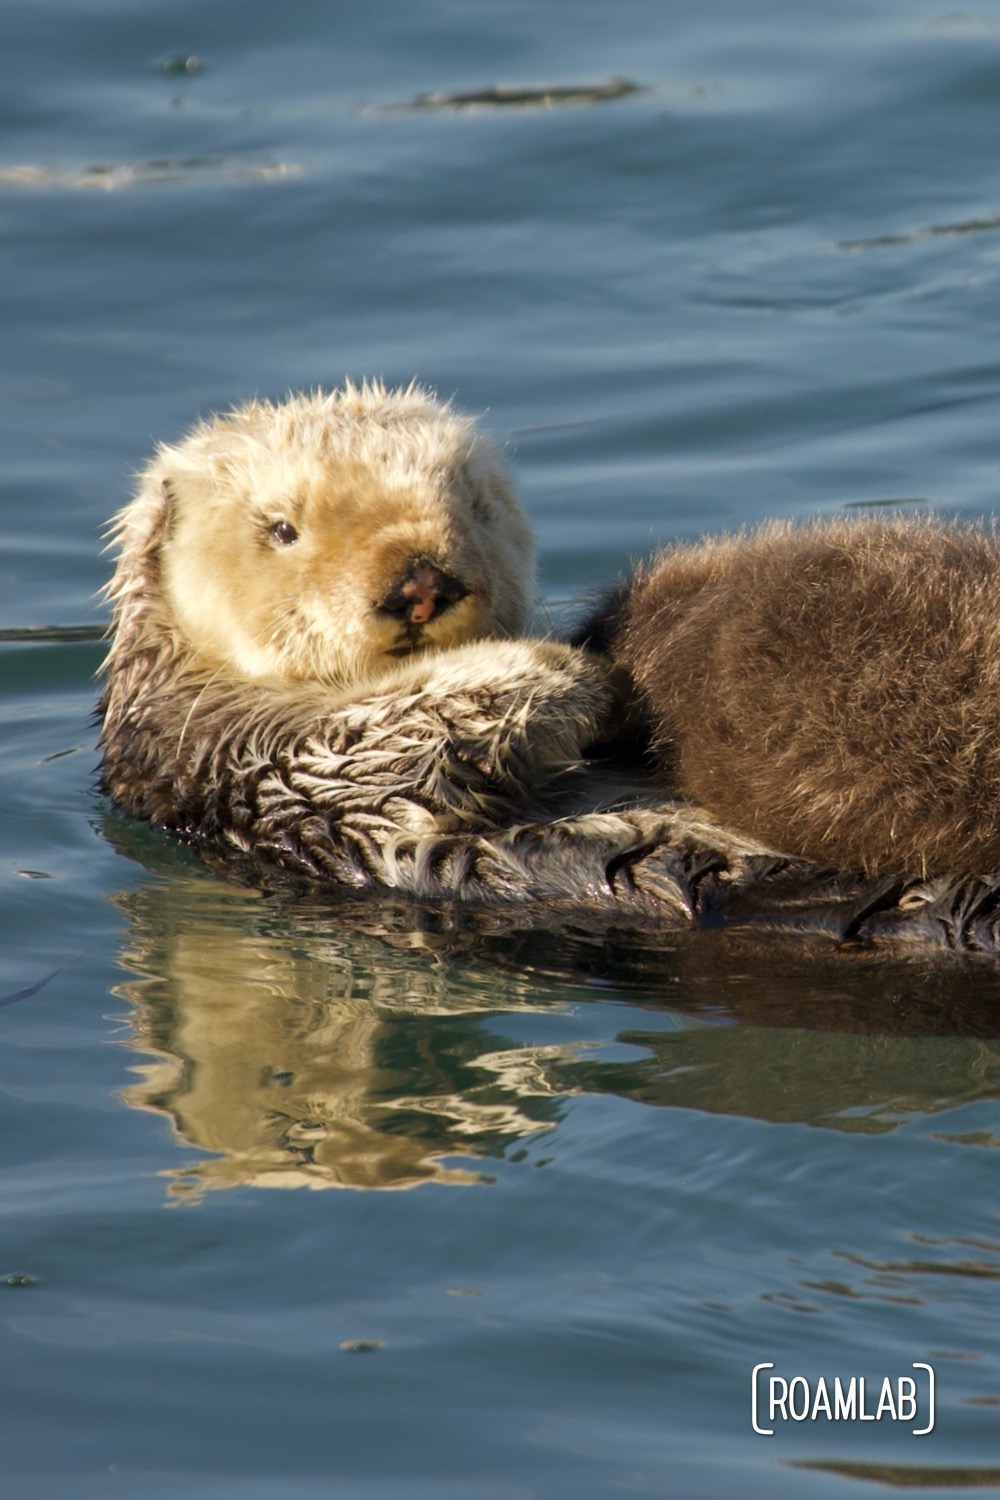 Mother sea otter with infant on belly looking directly into the camera.